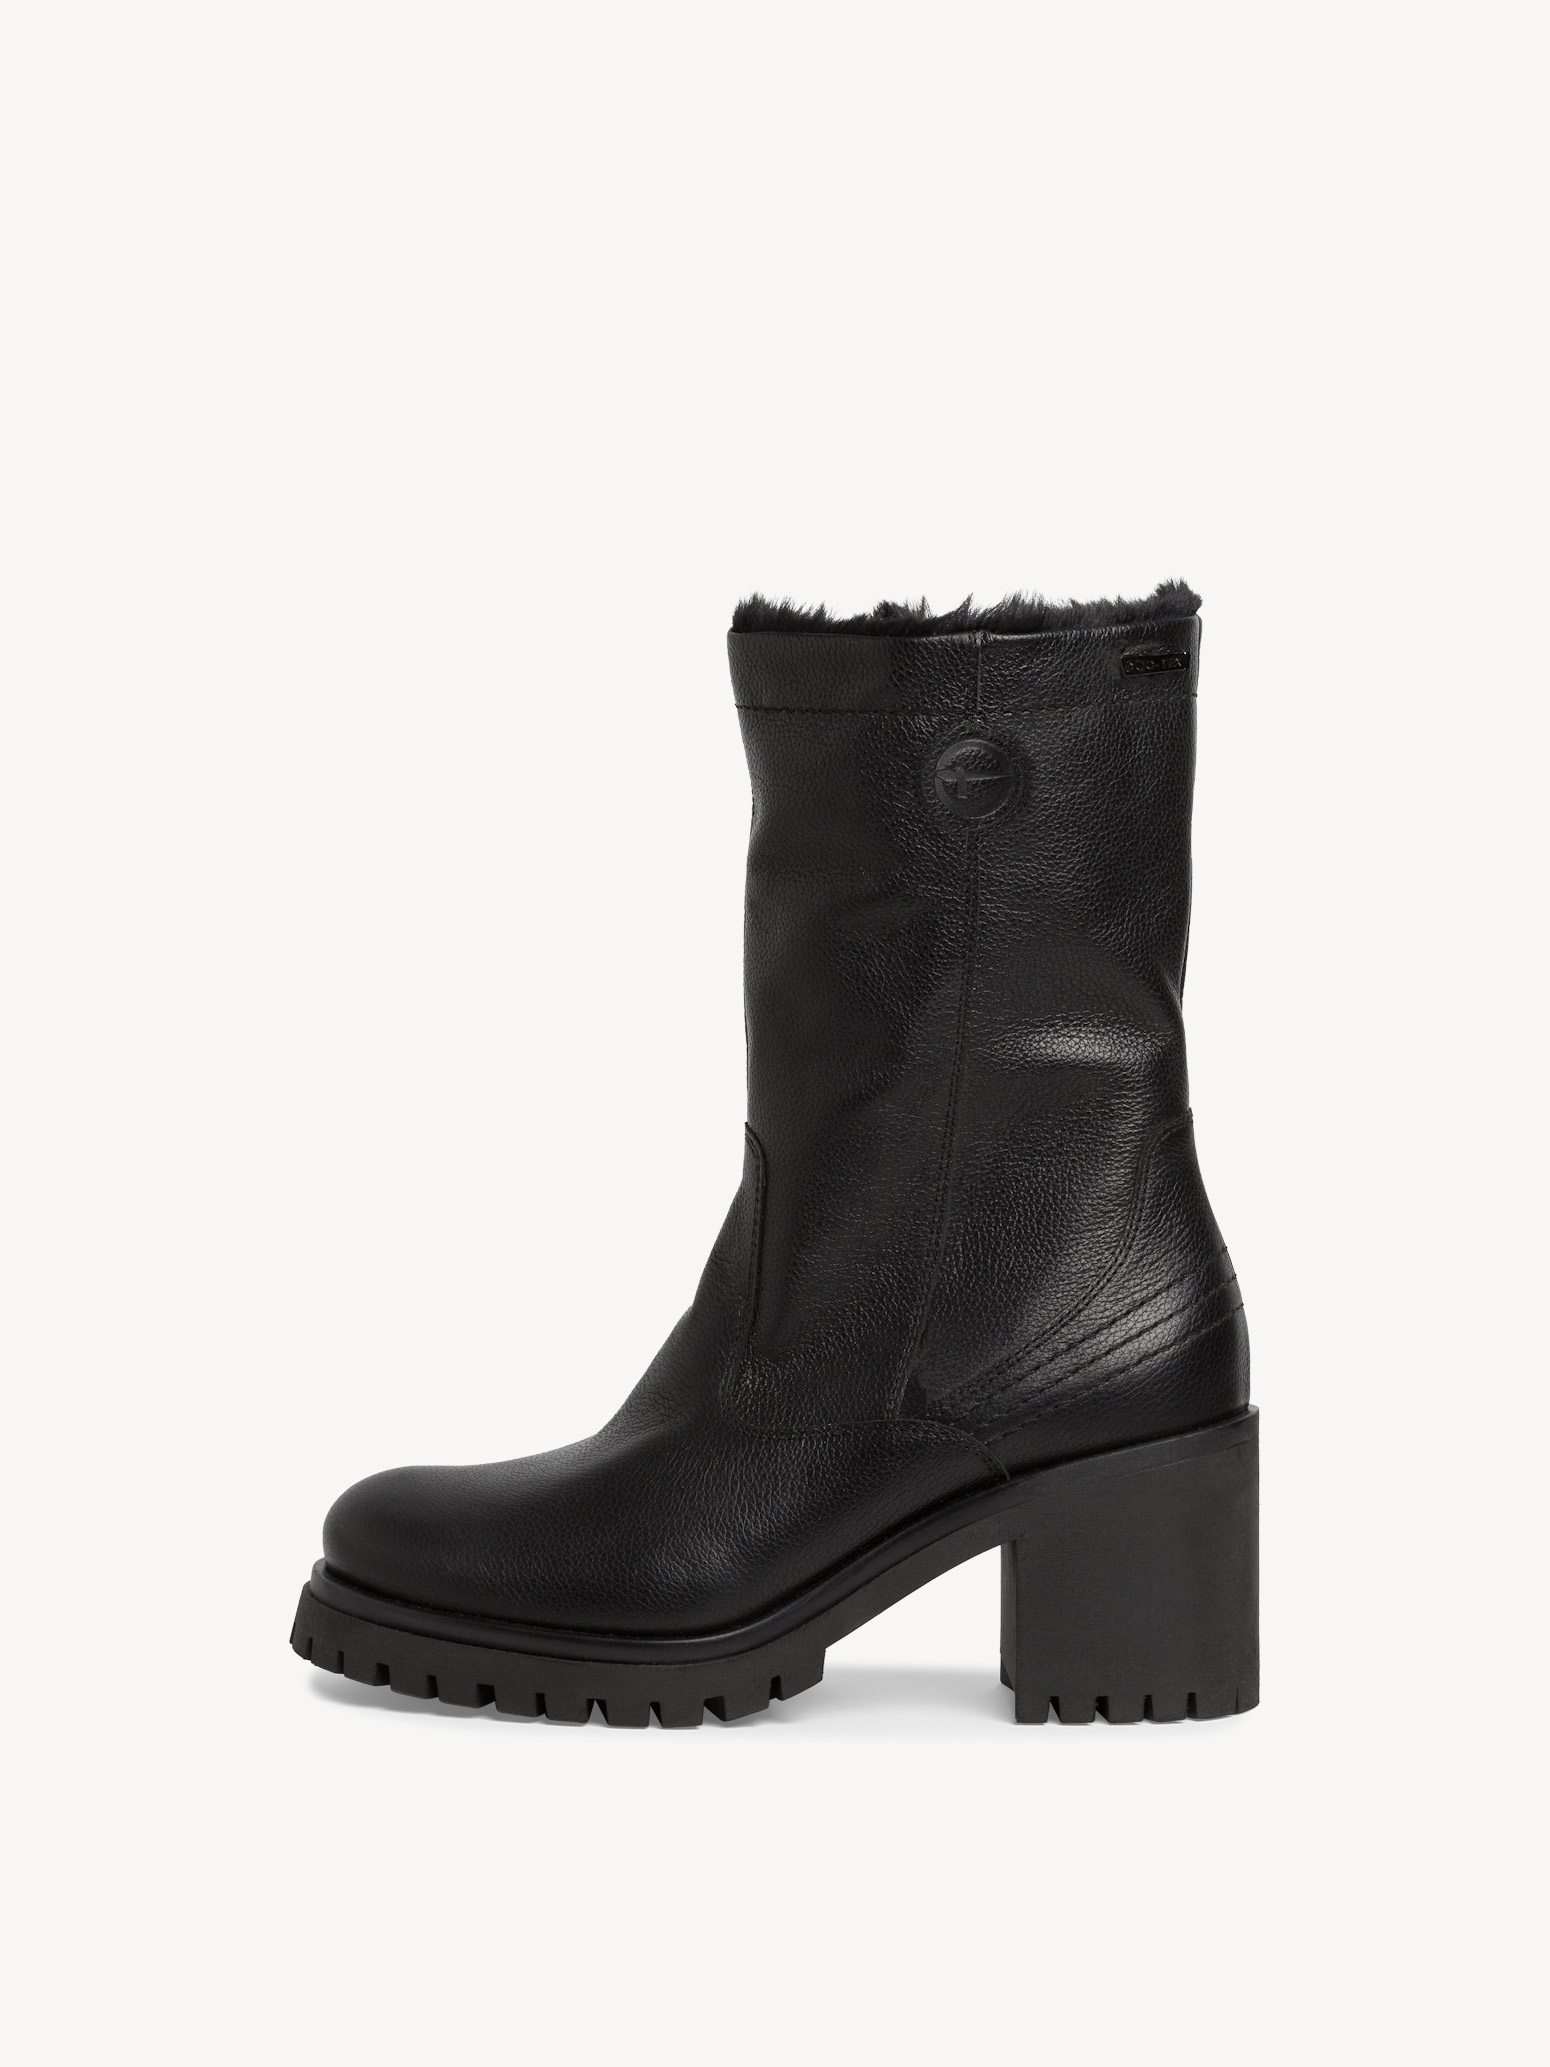 Leather Bootie - black warm lining